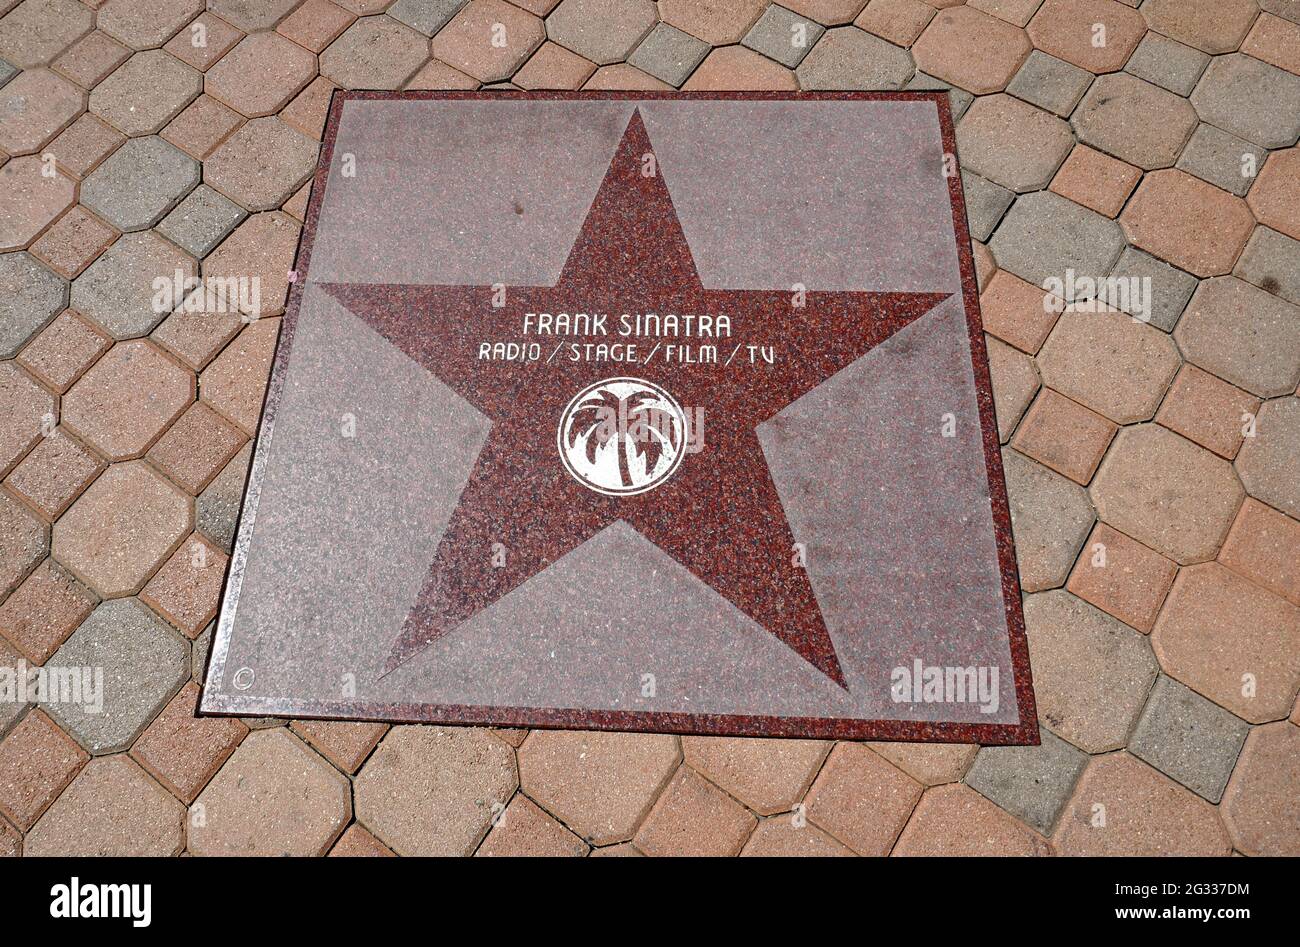 Palm Springs, California, USA 10th June 2021 A general view of atmosphere of singer/actor Frank Sinatra's Star on the Walk of Fame in Palm Springs, California, USA. Photo by Barry King/Alamy Stock Photo Stock Photo